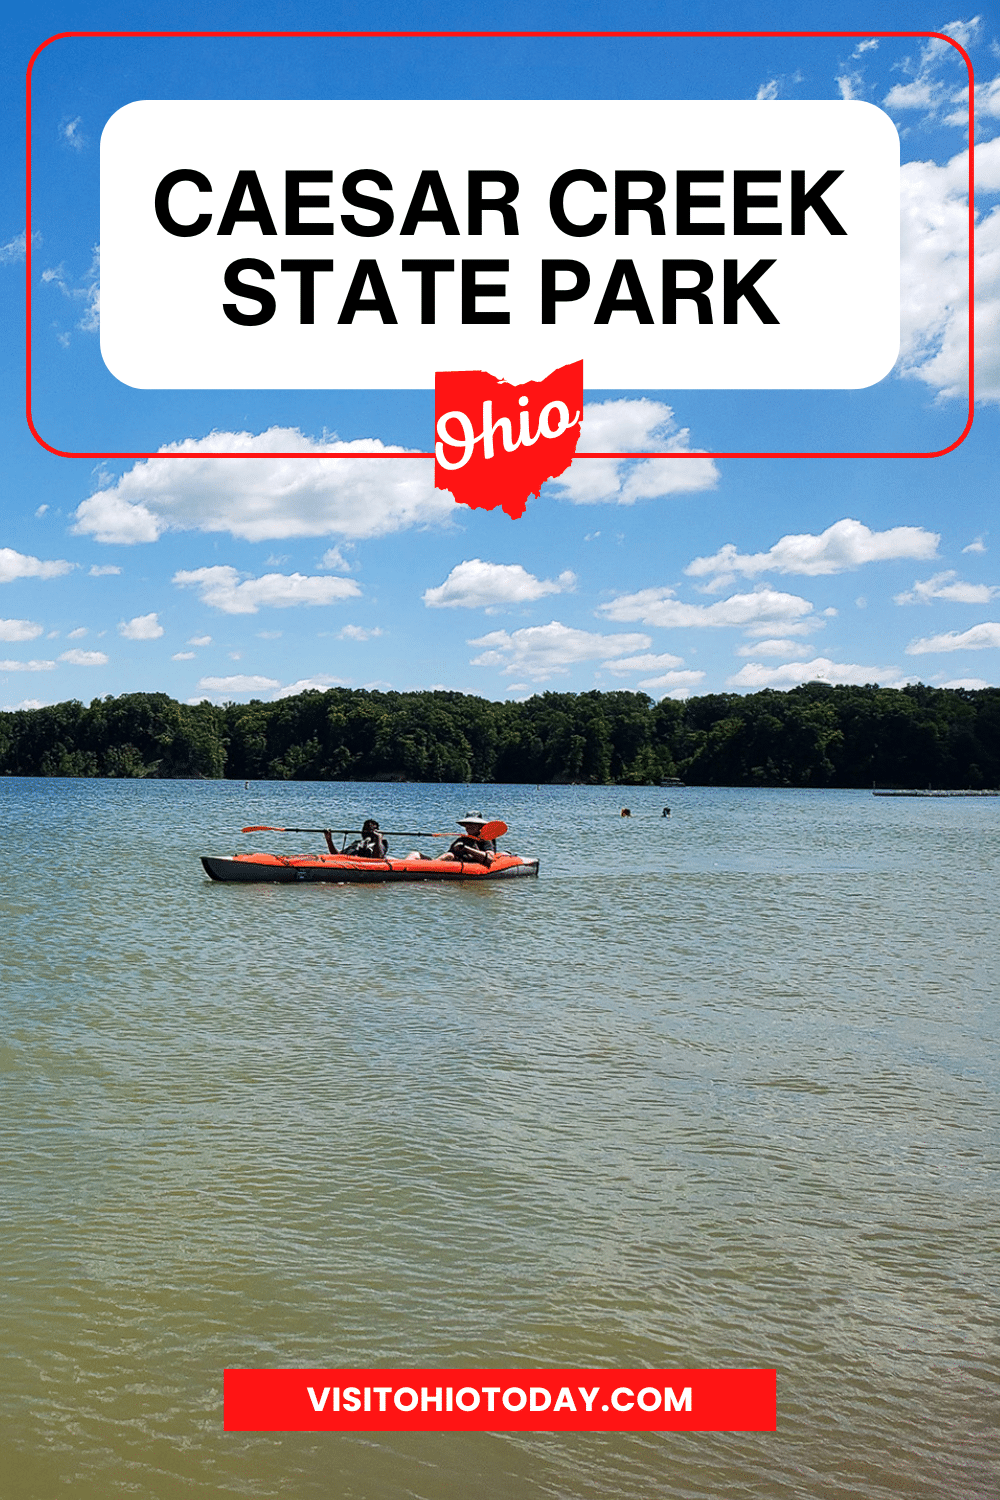 Discover the natural wonders of Caesar Creek State Park in Waynesville, Ohio! 🌳 Explore miles of scenic trails, go fishing or boating on the lake, or simply relax amidst the serene beauty of this stunning park. Plan your outdoor adventure today! #CaesarCreek #WaynesvilleOhio #NatureLovers"